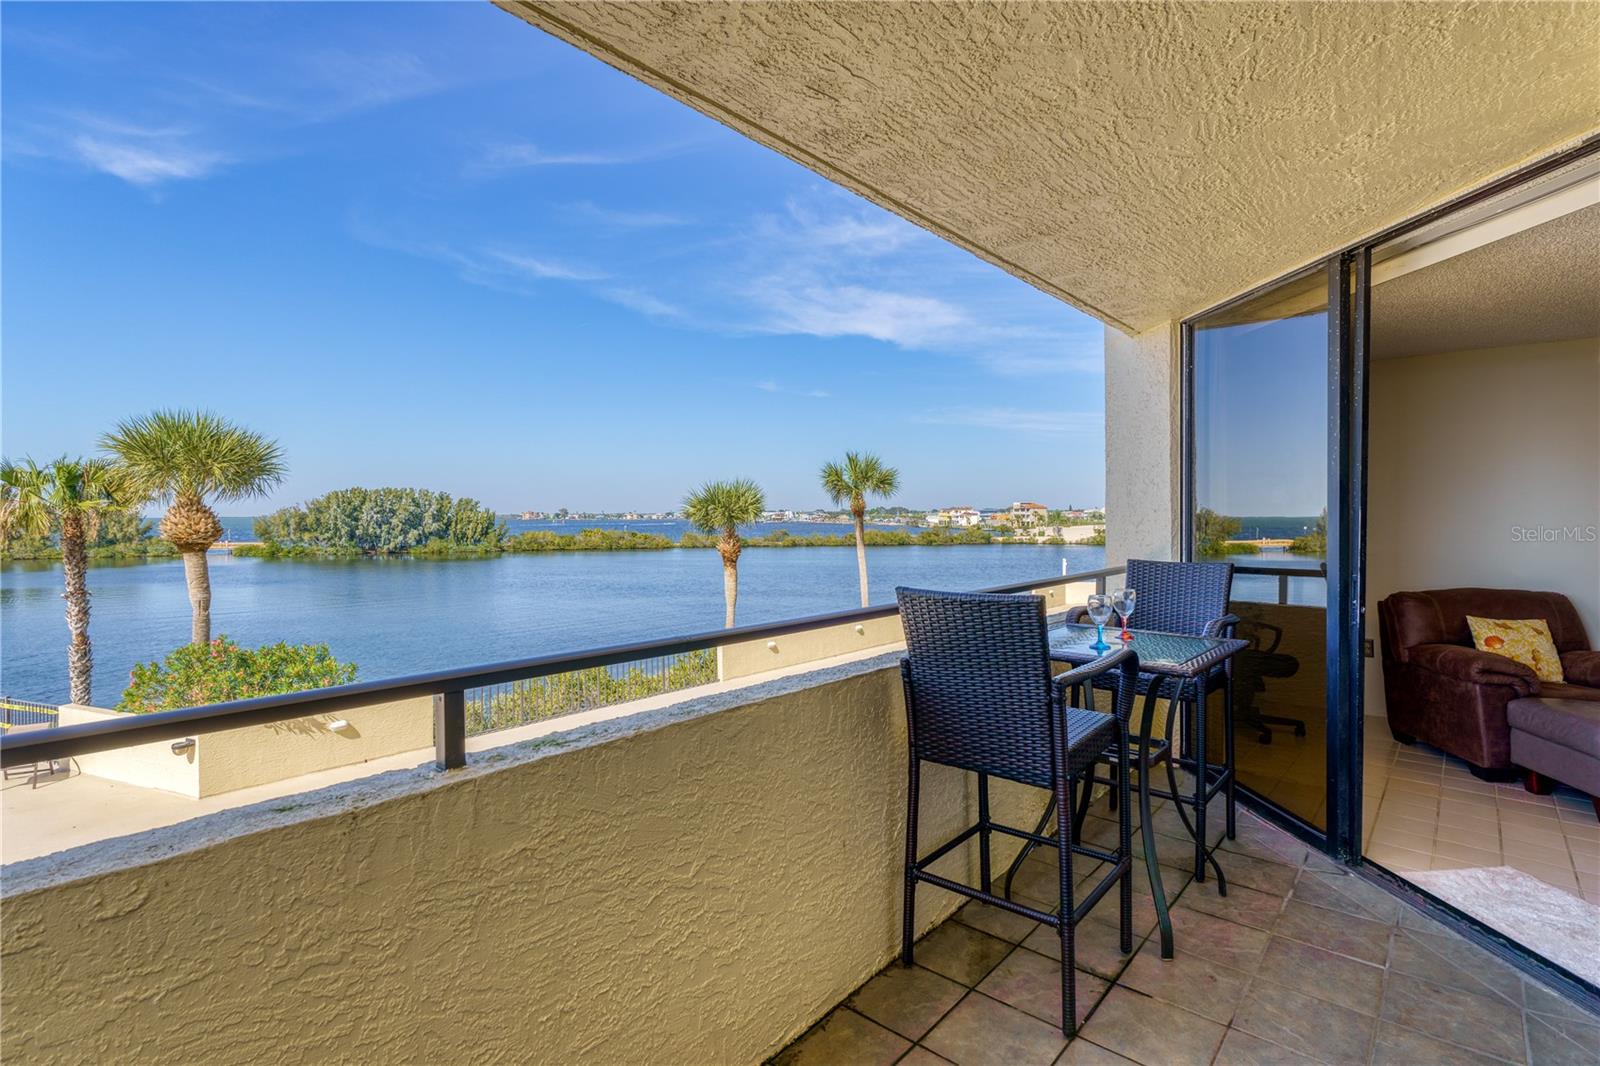 BEAUTIFUL Views of the Gulf of Mexico from your private Balcony!